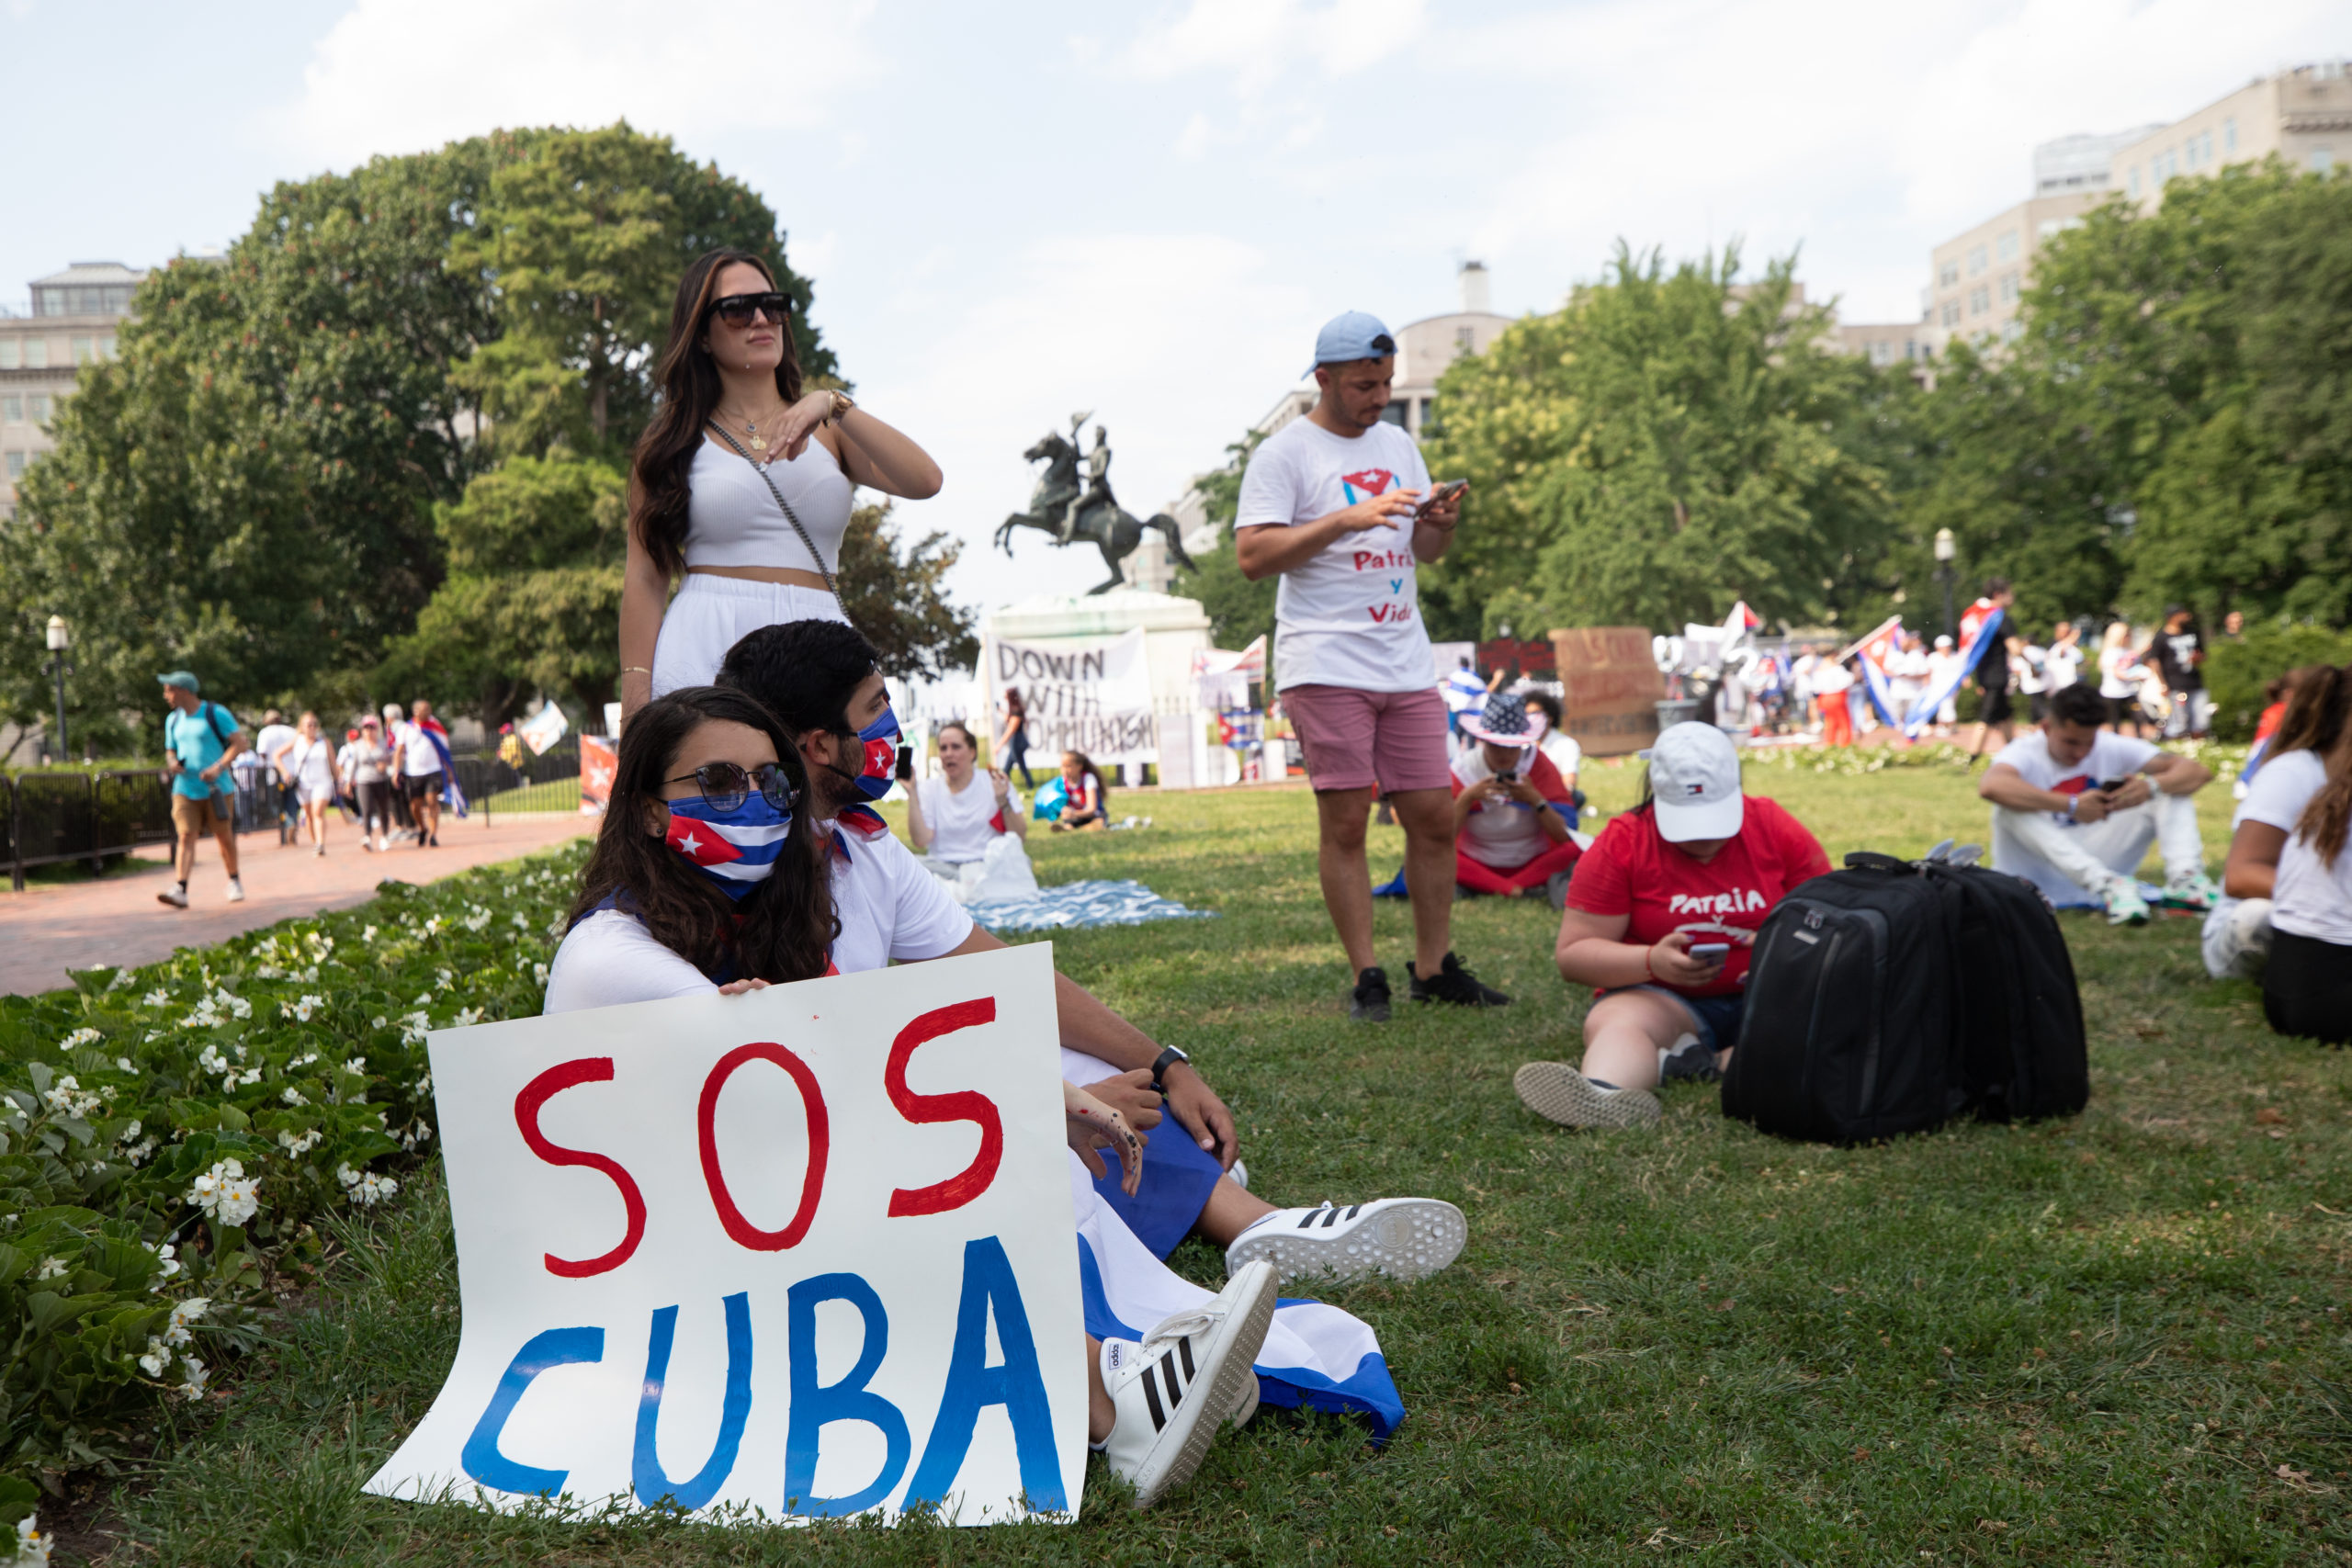 Demonstrators participated in a rally for Cuban freedom near the White House where attendees asked President Joe Biden to intervene and end communist rule over the country, in Washington, D.C. on July 26, 2021. (Kaylee Greenlee - Daily Caller News Foundation)